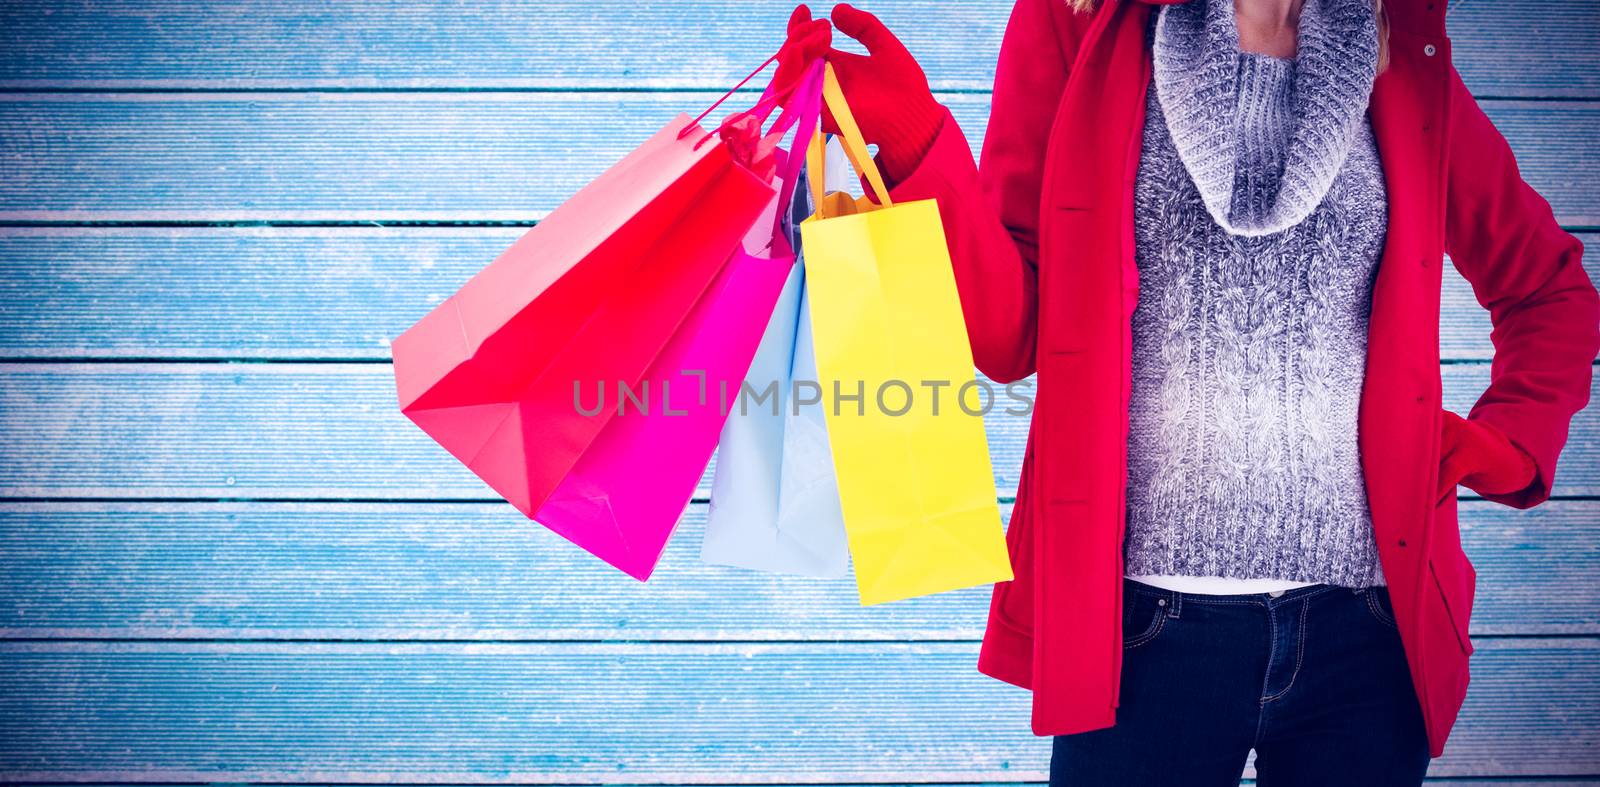 Blonde in winter clothes holding shopping bags against wooden planks